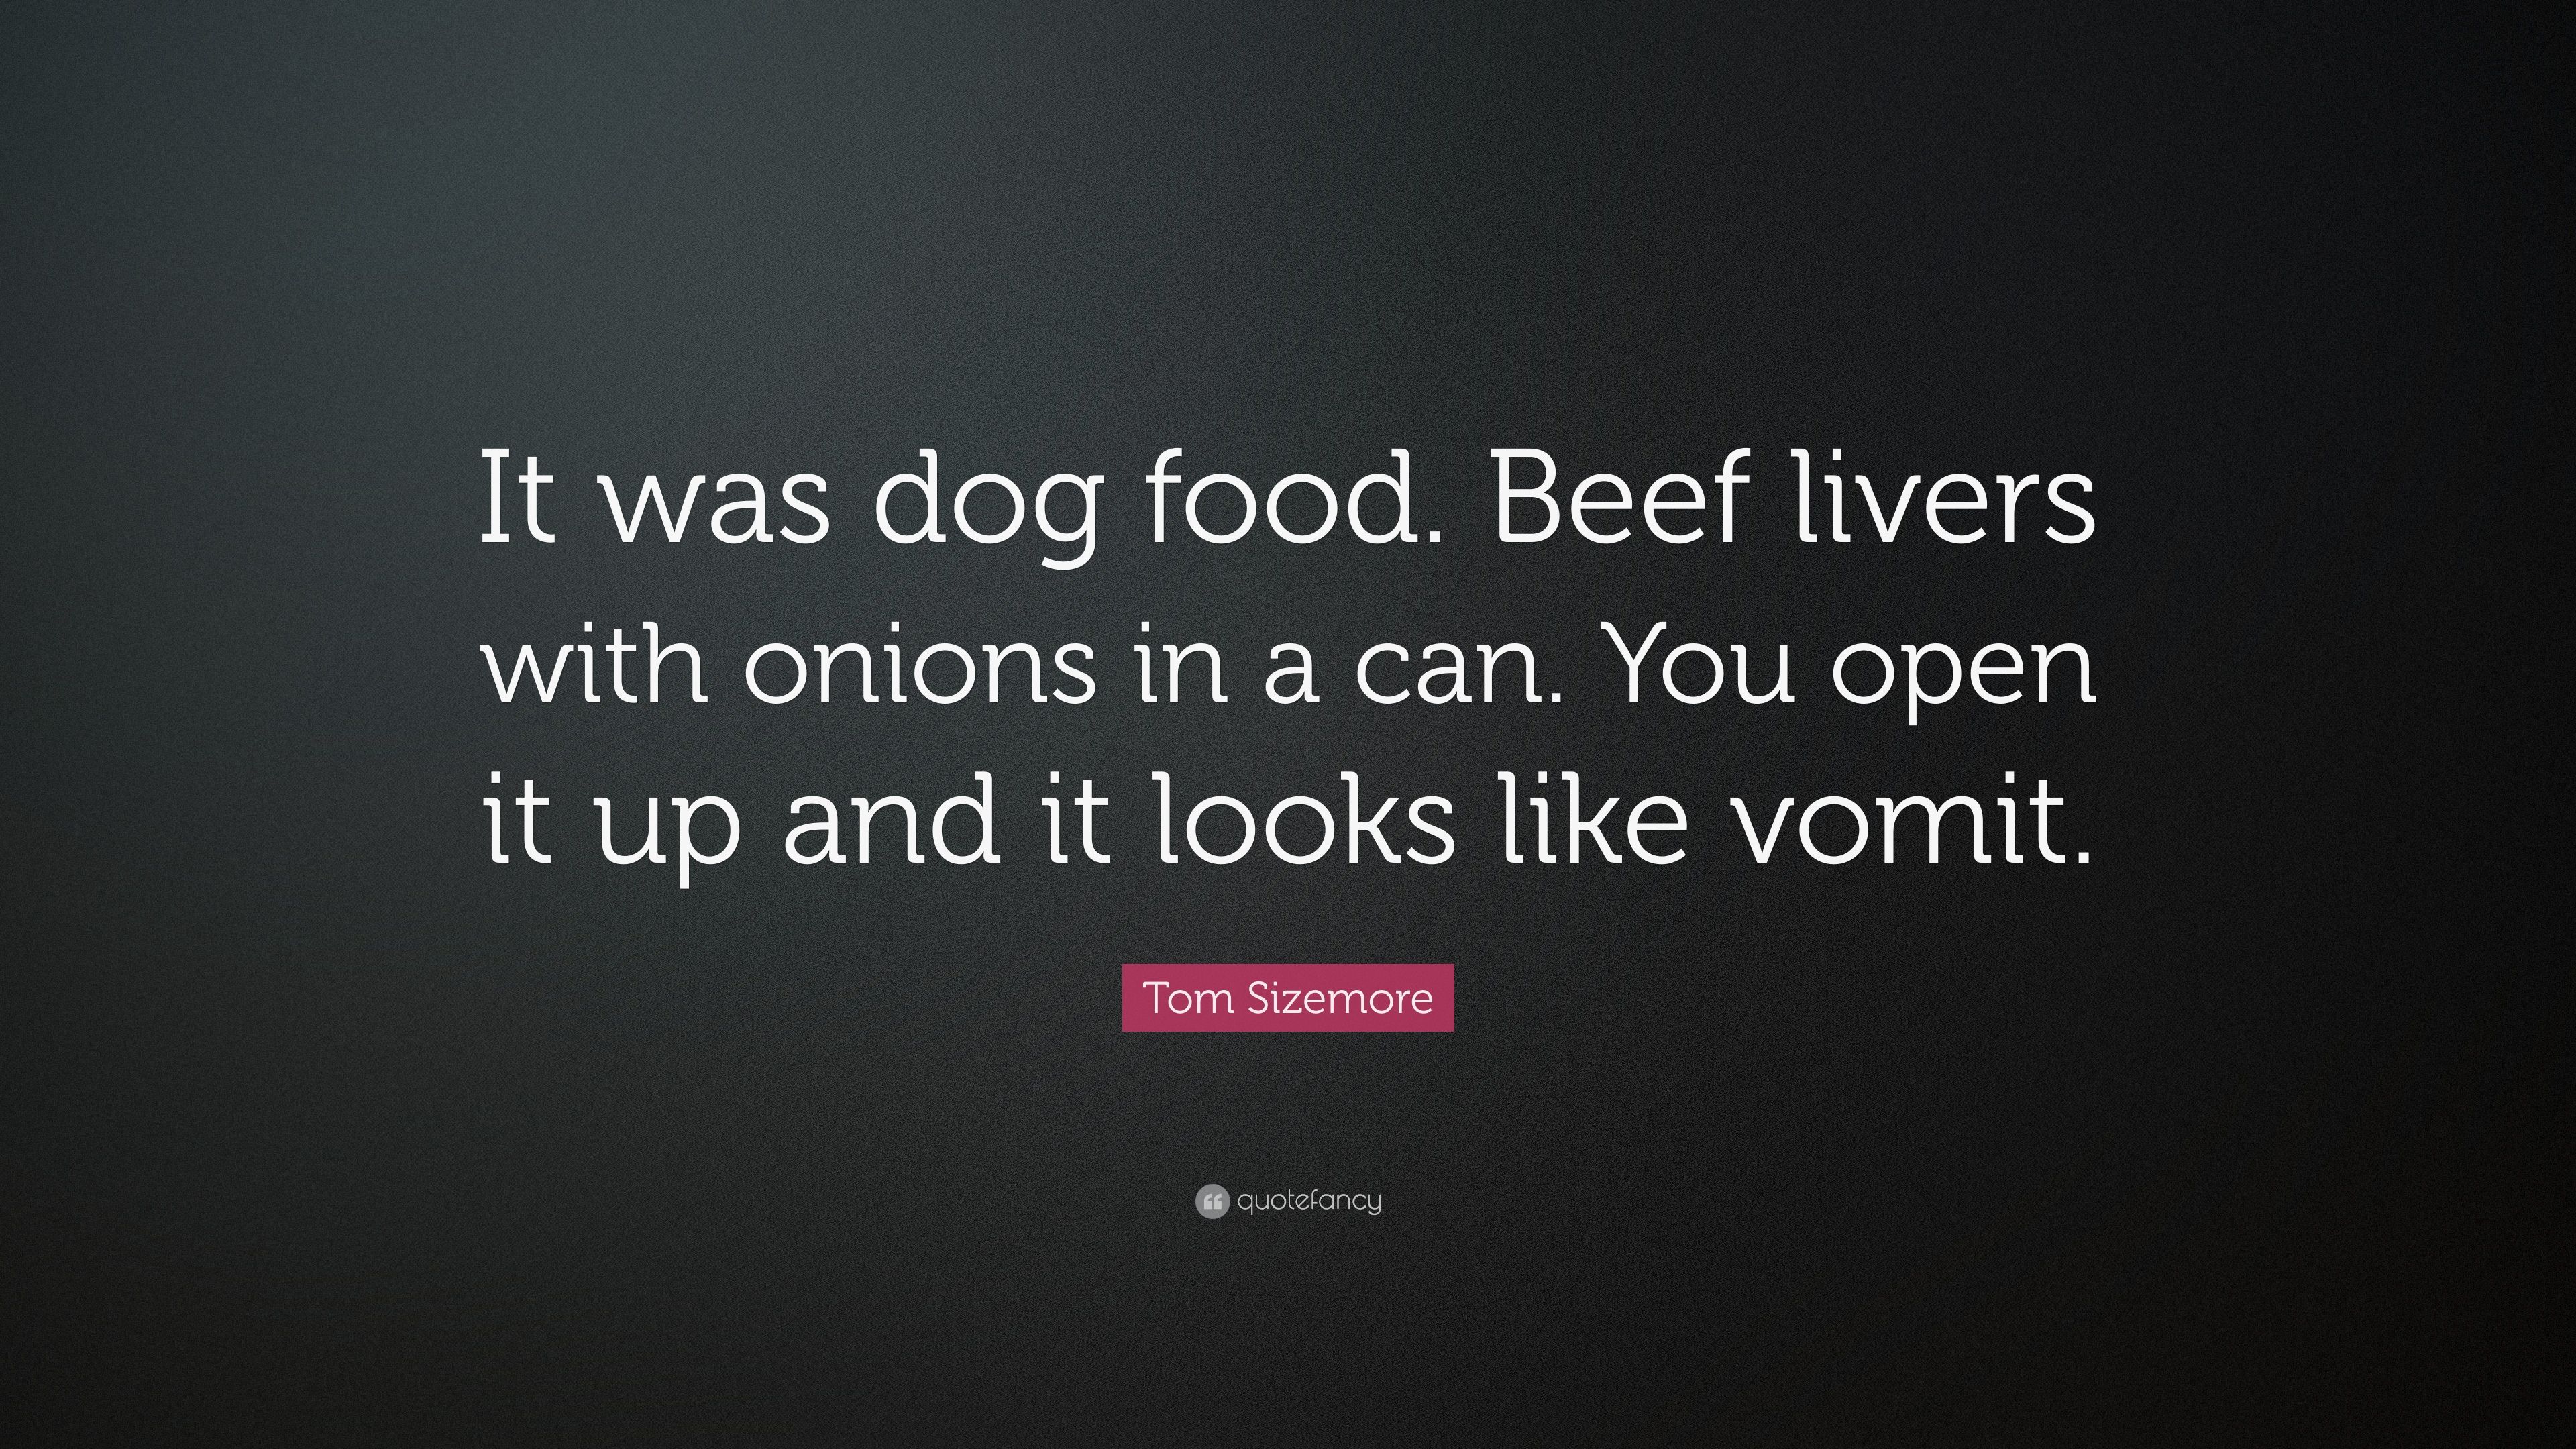 Tom Sizemore Quote: “It was dog food. Beef livers with onions in a